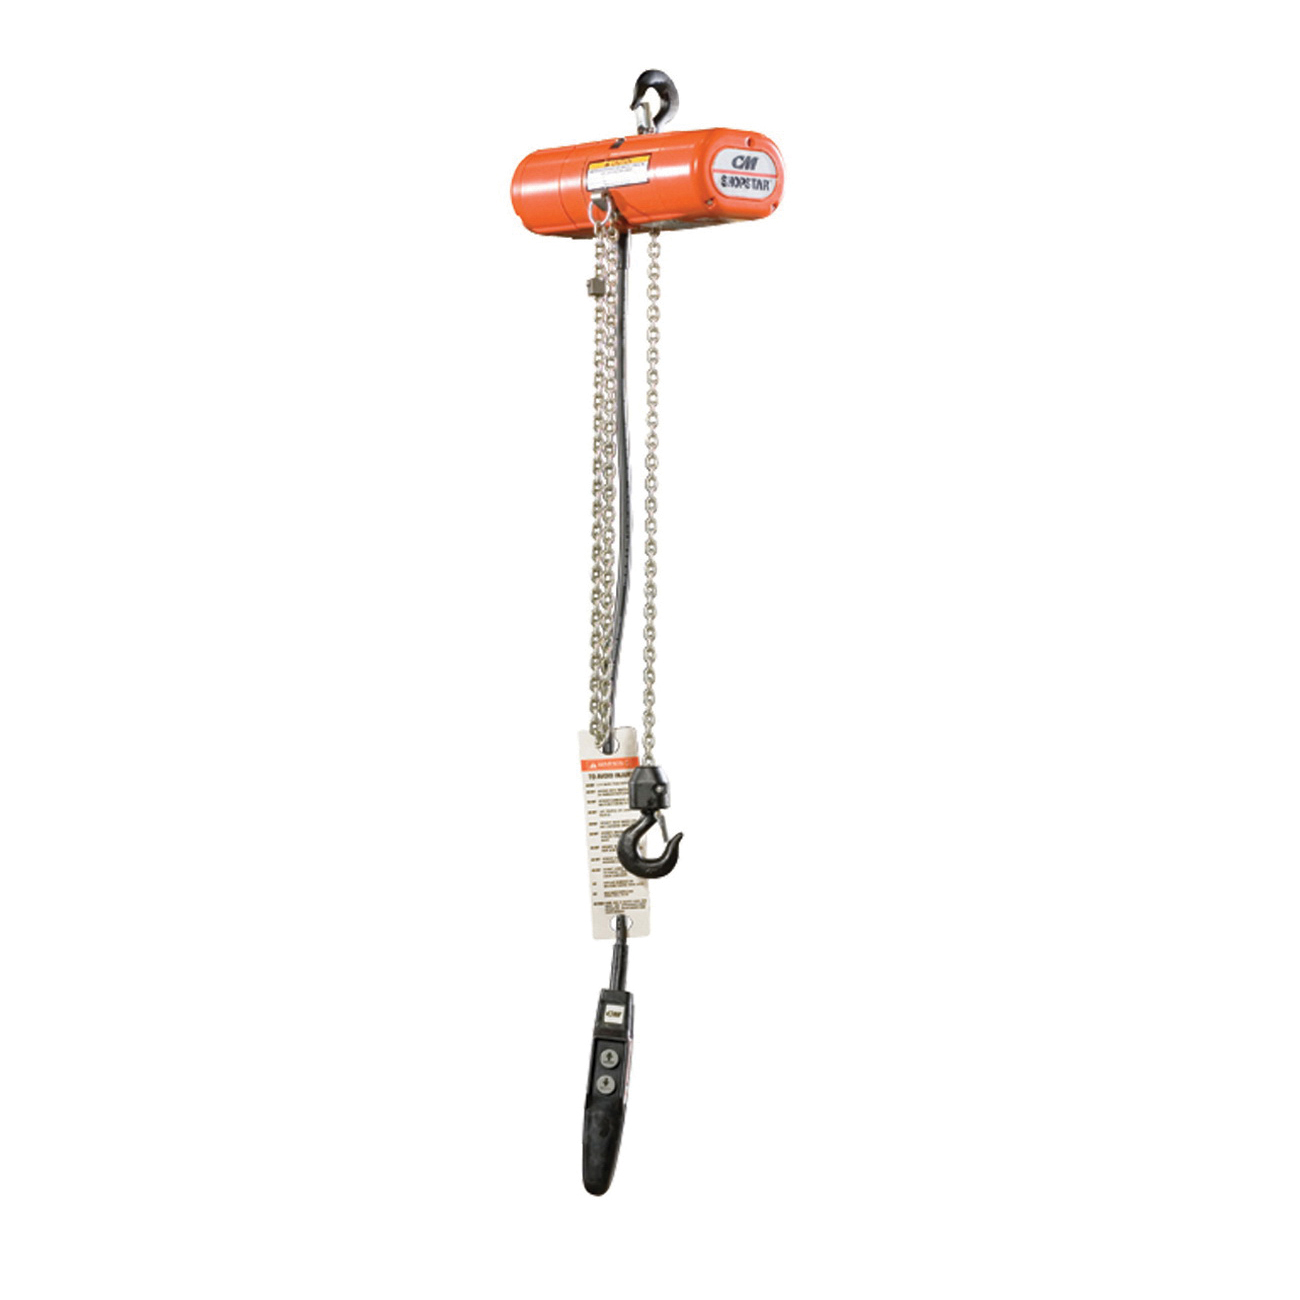 CM® 17050W TMM-140 Air Wire Rope Hoist, 300 lb Load, 6.6 ft Lifting Height, 21.2 scfm, 95 psi